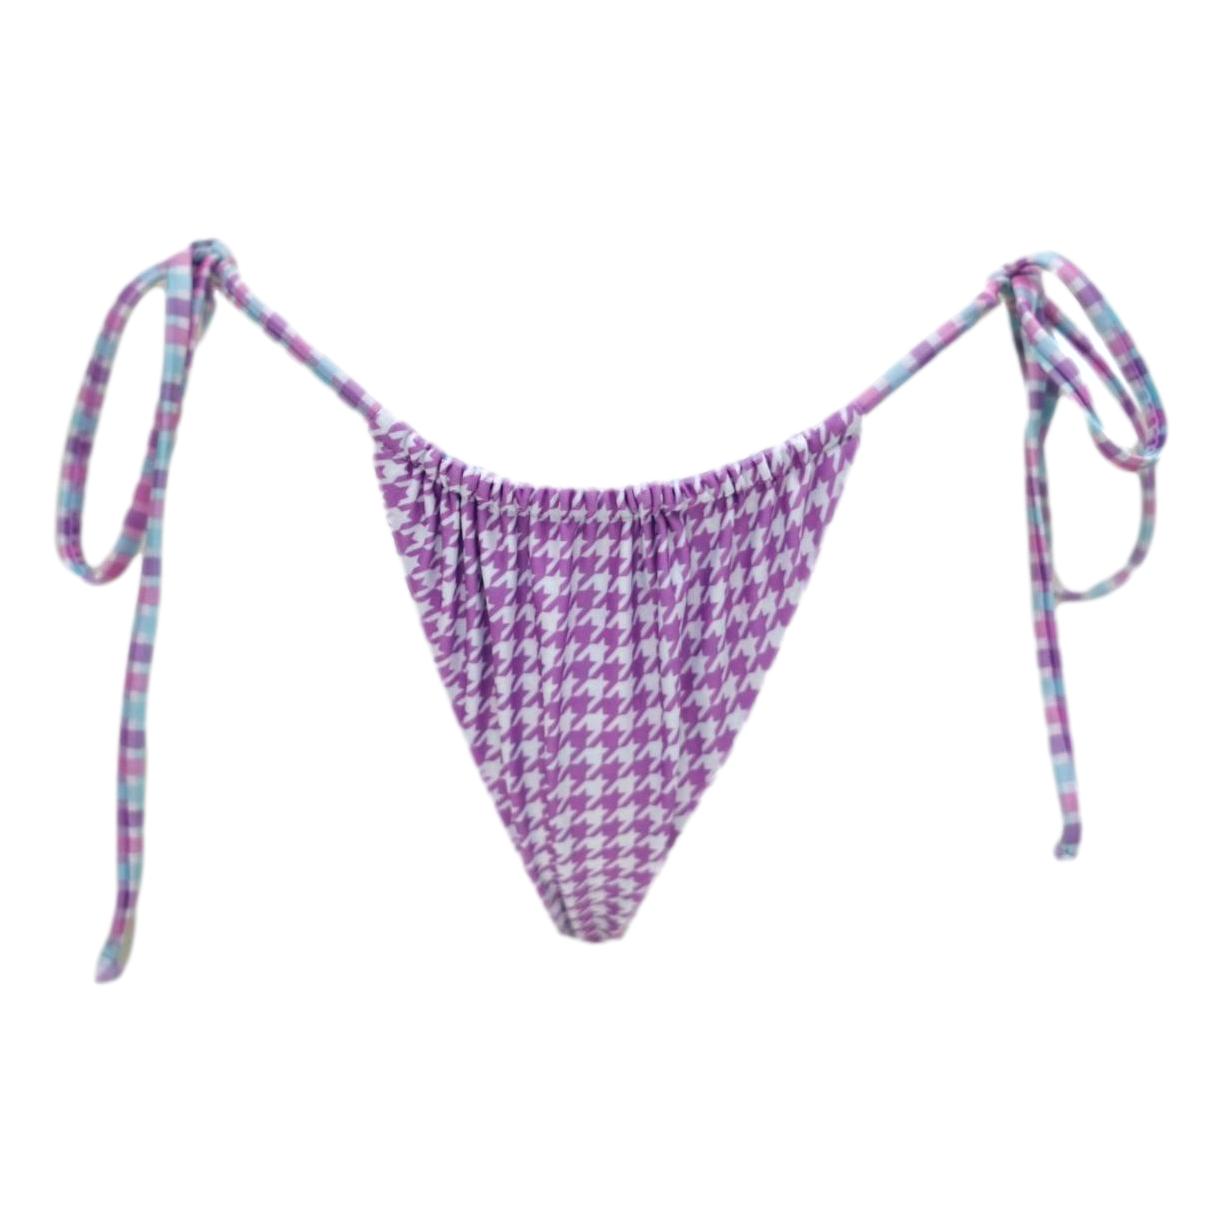 PIPER TIE SIDE BOTTOMS HOUNDSTOOTH